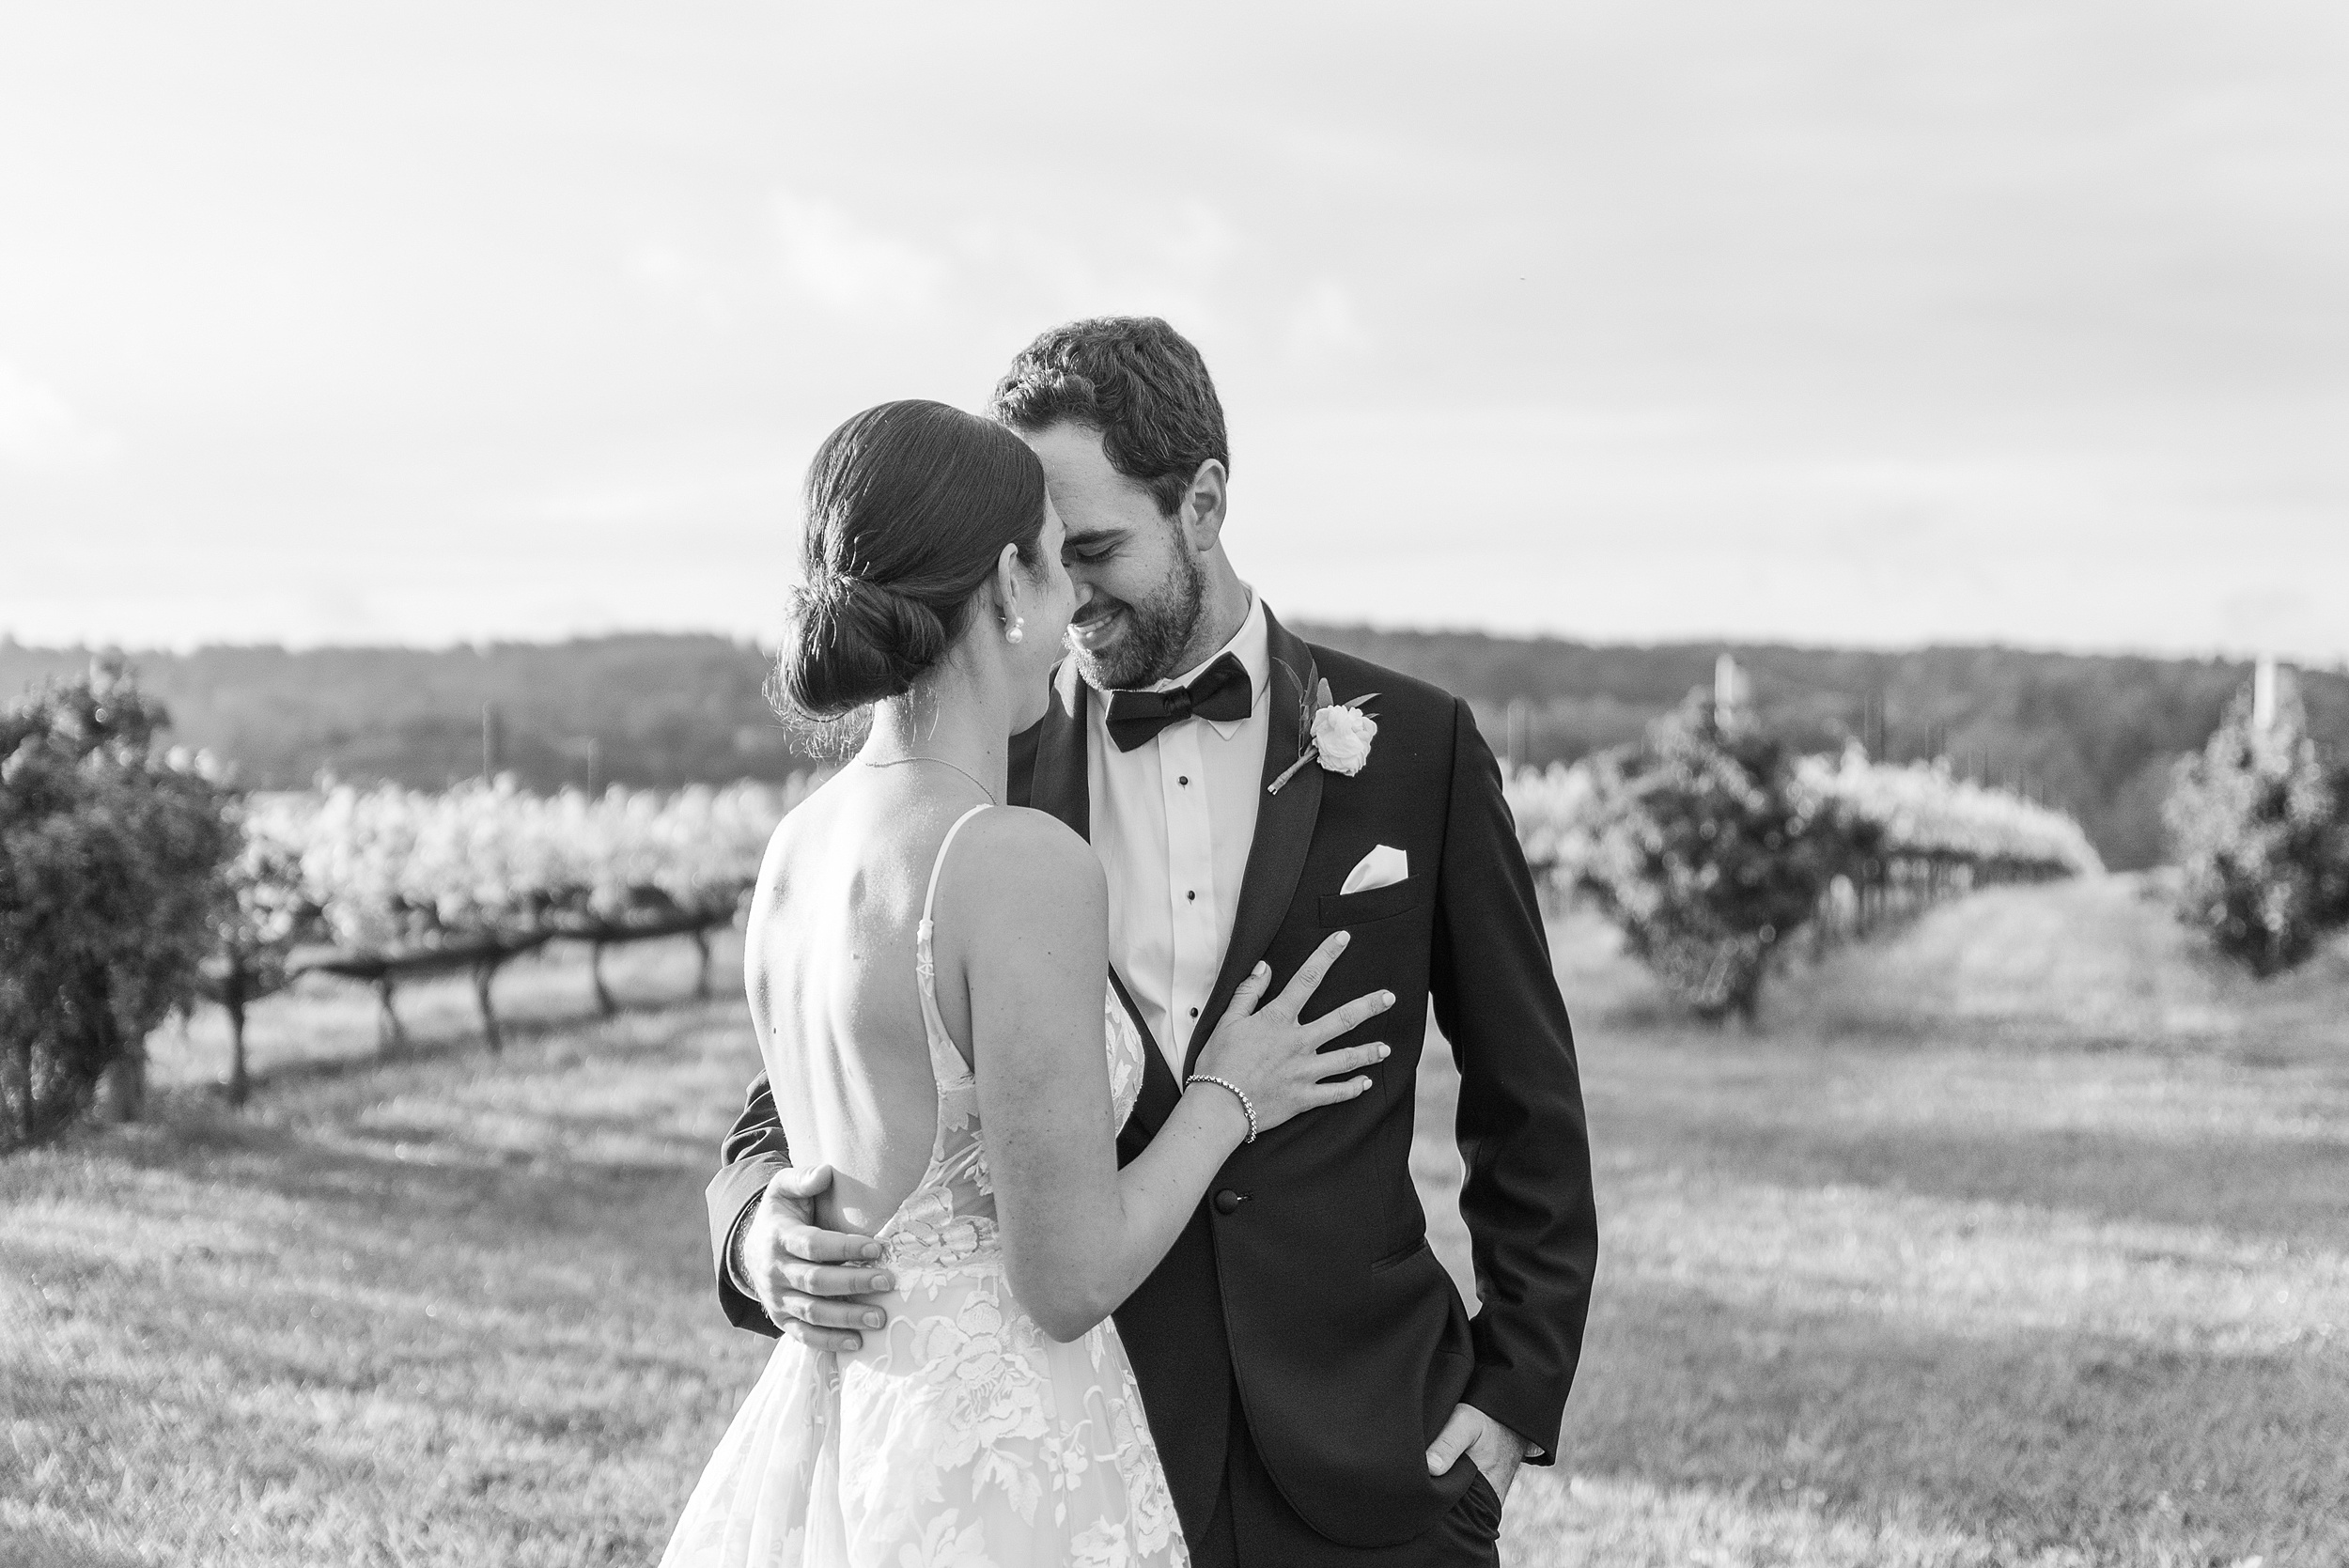 Newlyweds stand out among the vineyards at their wedding